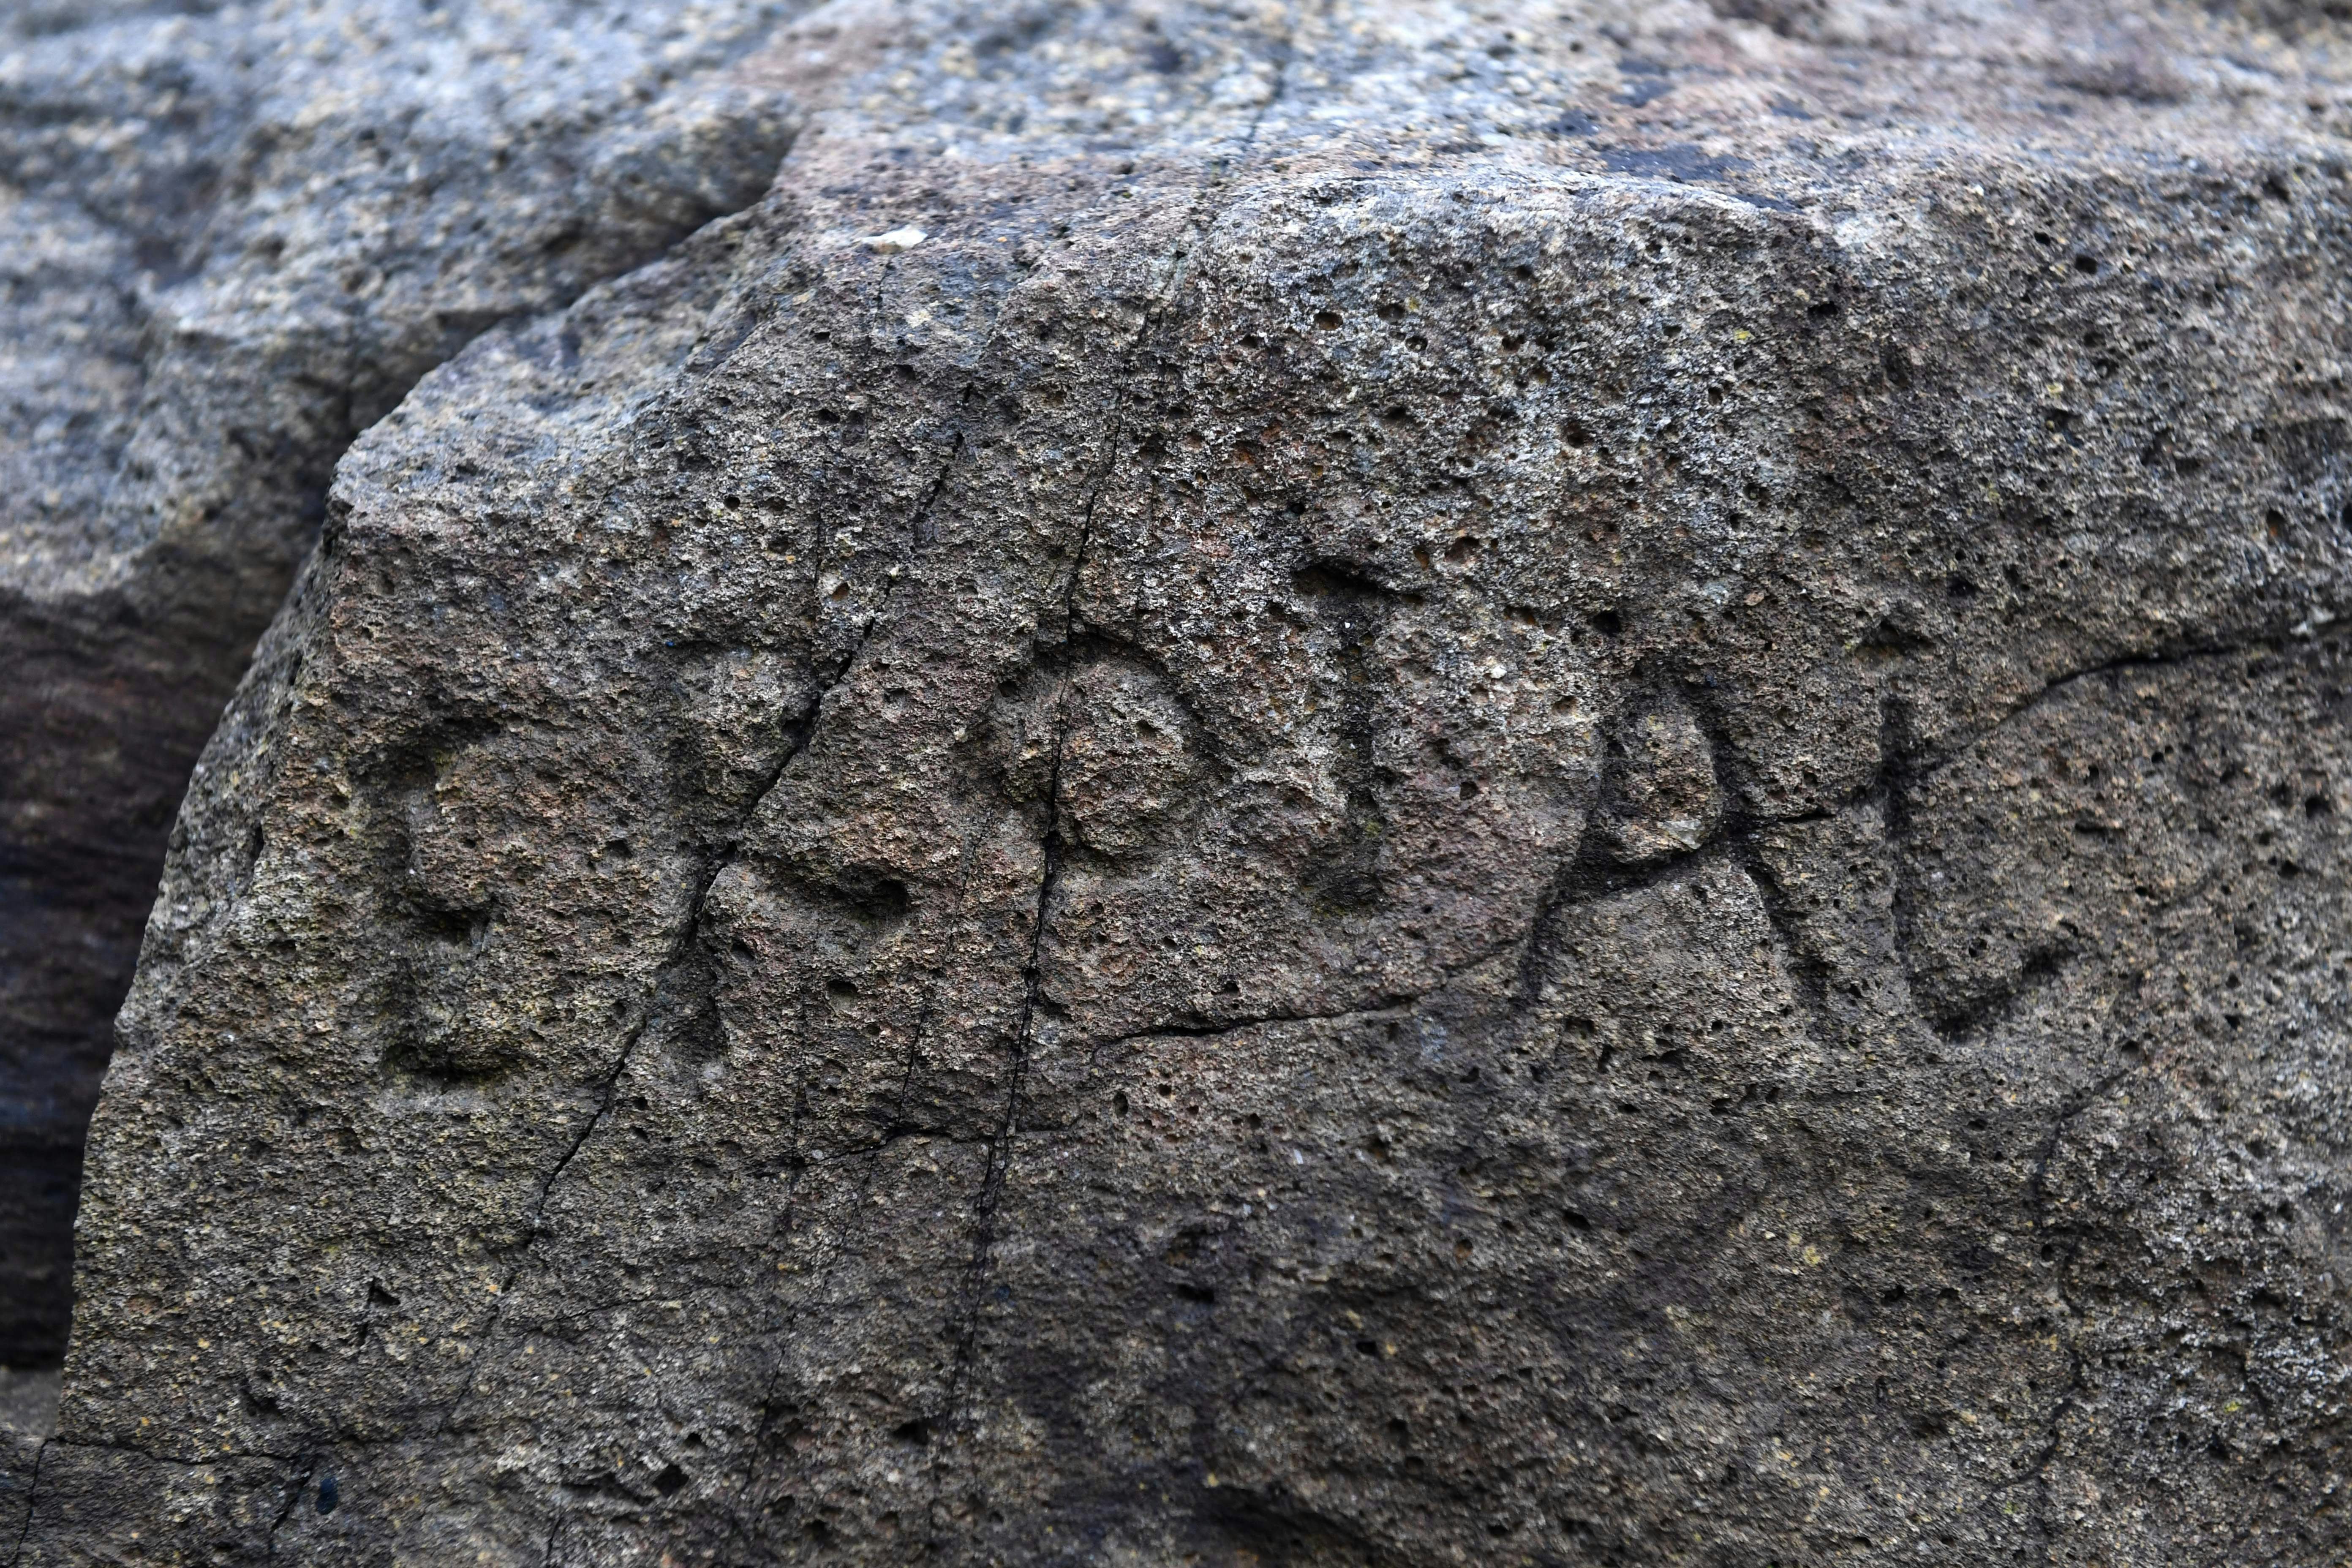 A picture of a word on the Plougastel-Daoulas rock